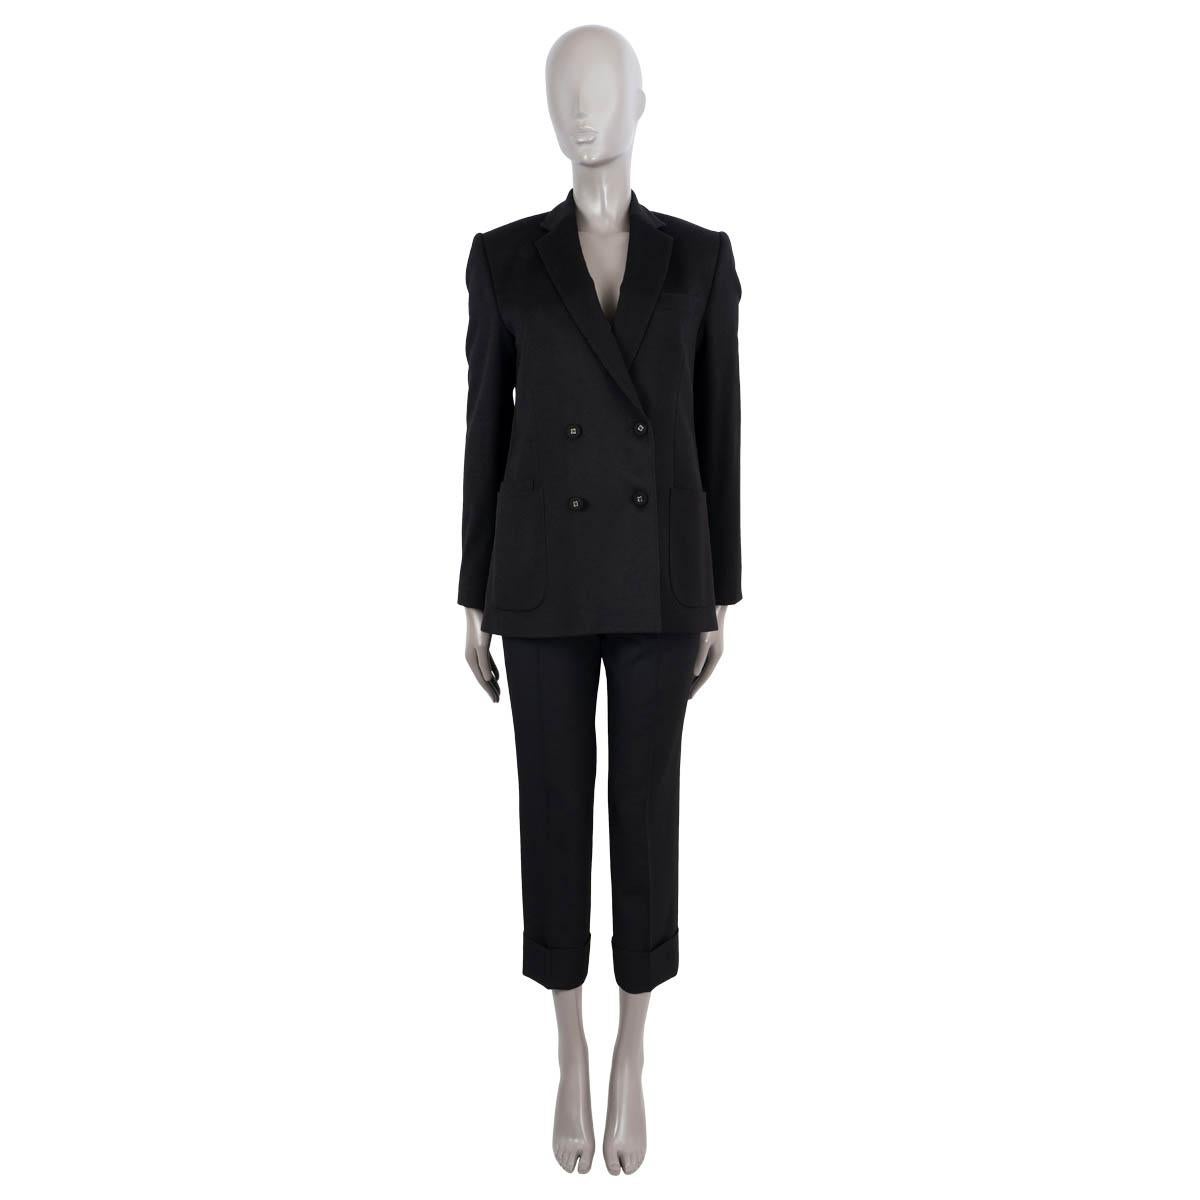 100% authentic Officine Générale double-breasted blazer in black wool (100%). Features notch lapels, two patch pockets on the front with an additional patch money pocket and buttoned cuffs. Closes with fabric covered buttons. Lined in viscose